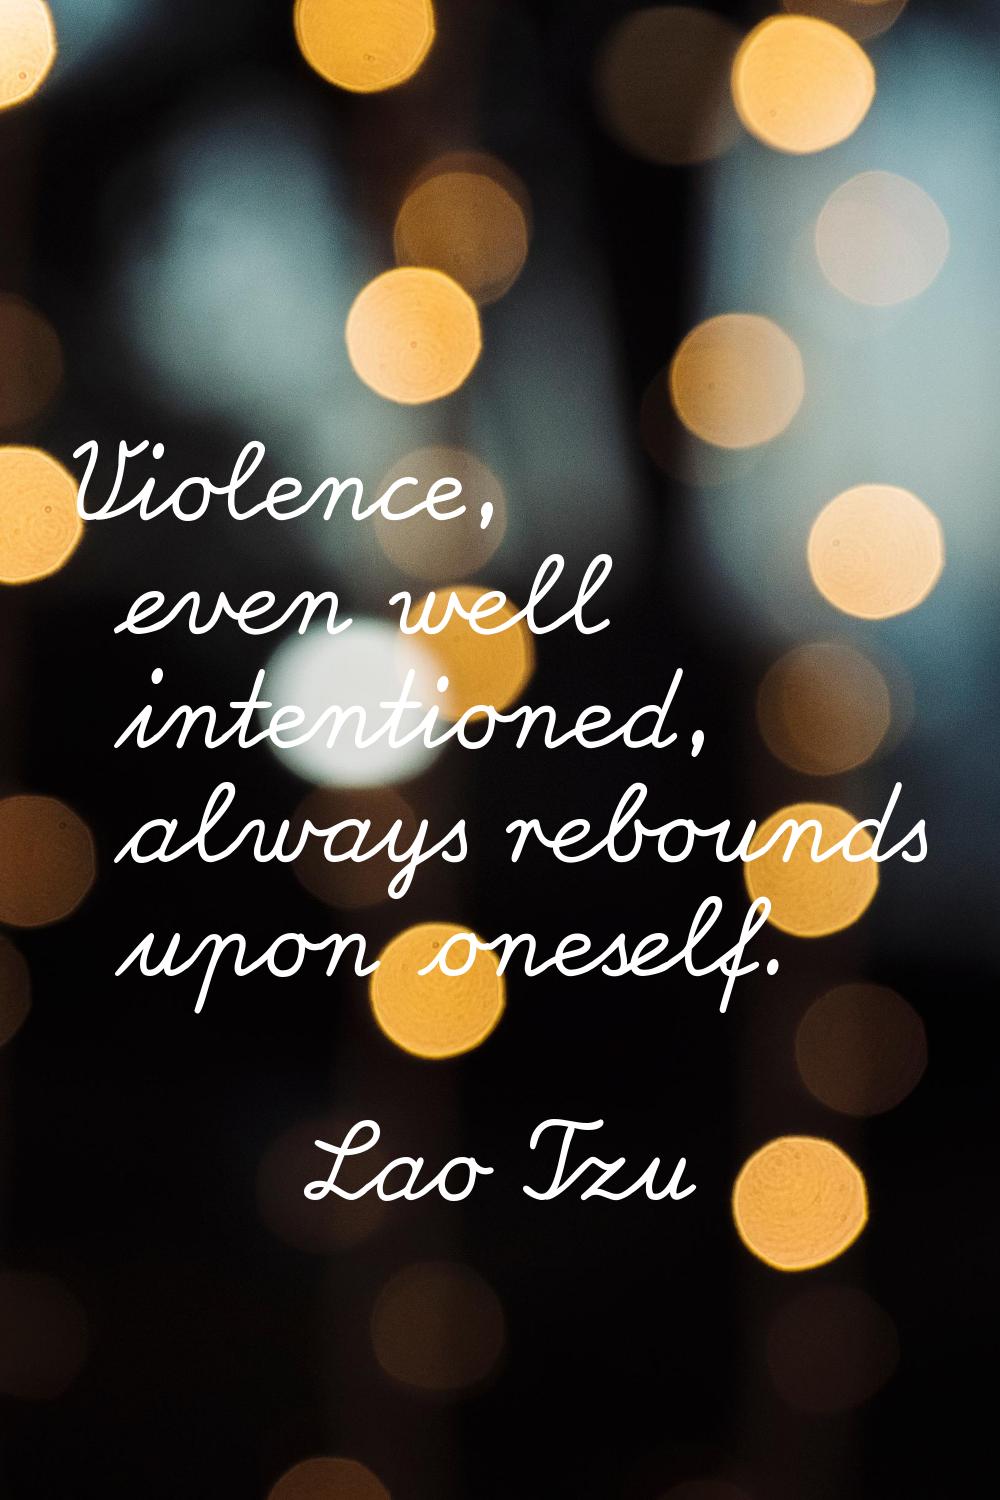 Violence, even well intentioned, always rebounds upon oneself.